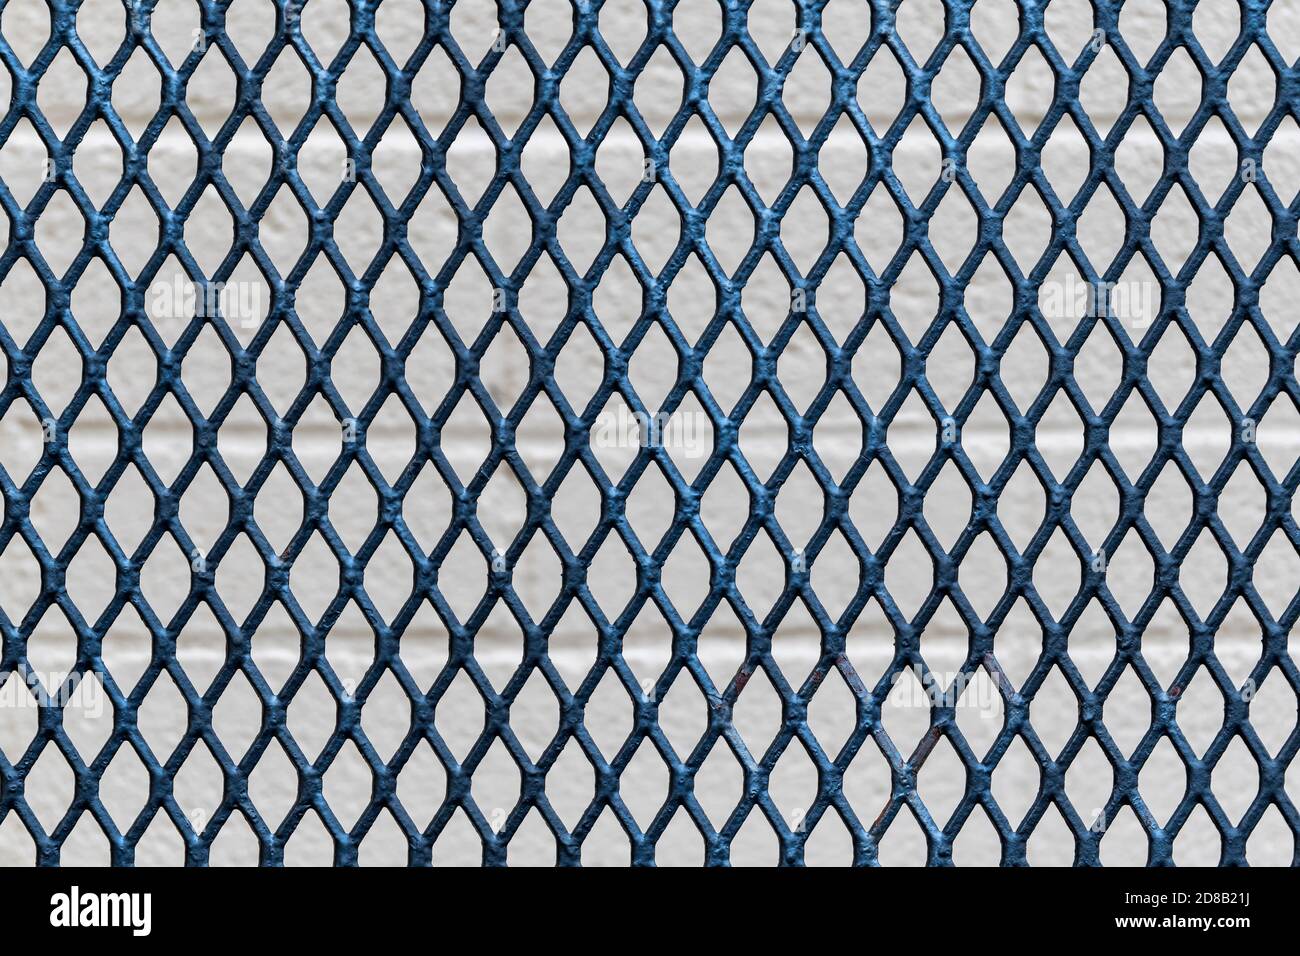 A diamond grid pattern in a metal fence. Cinder block wall behind, outside depth of field. Stock Photo